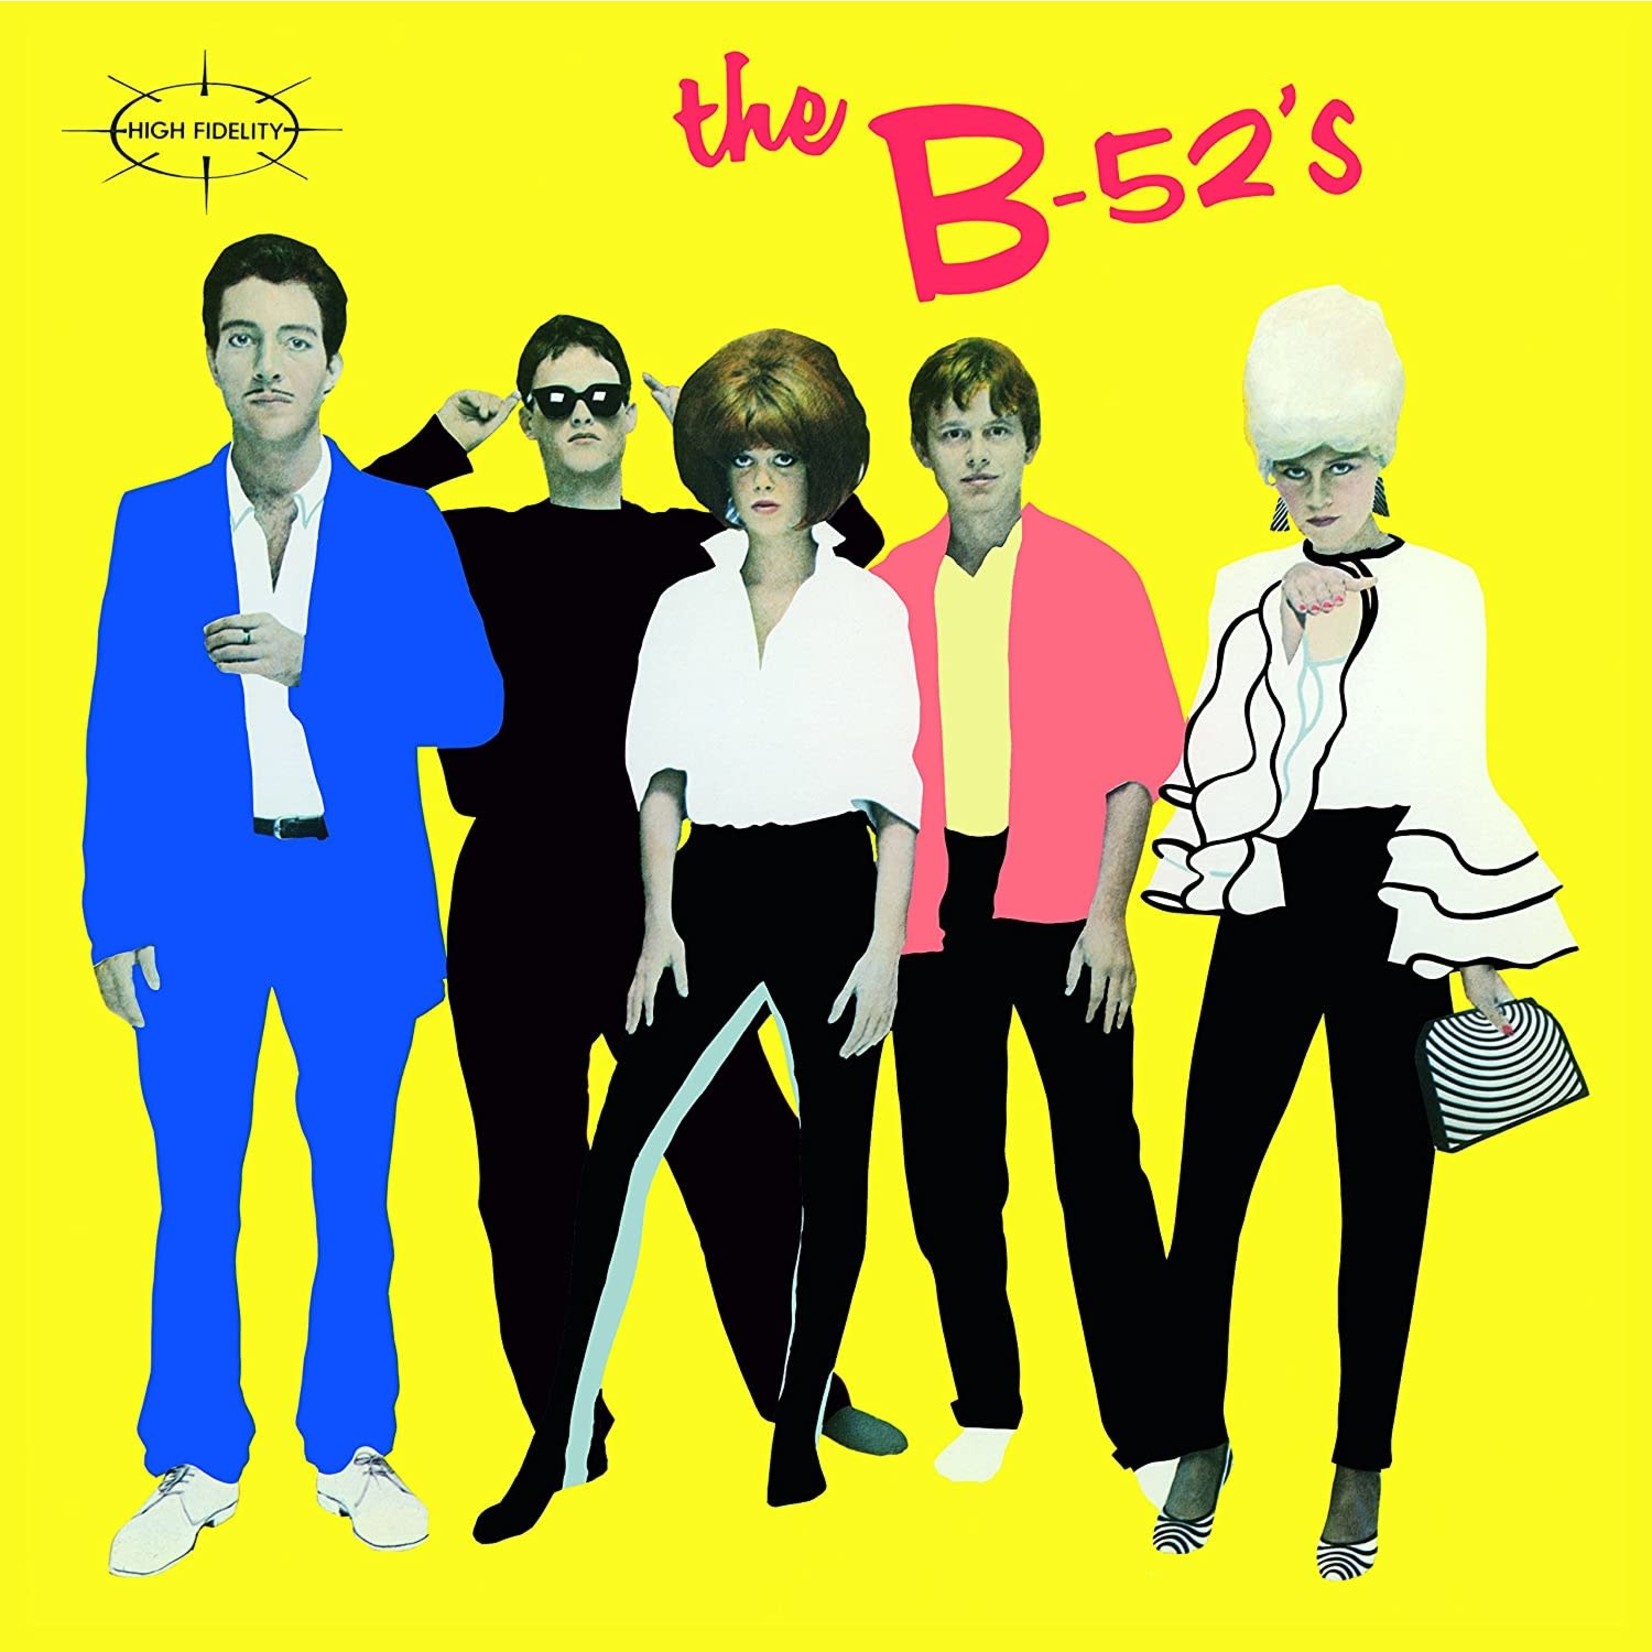 [Vintage] B-52s - self-titled (LP, yellow cover, "Rock Lobster")